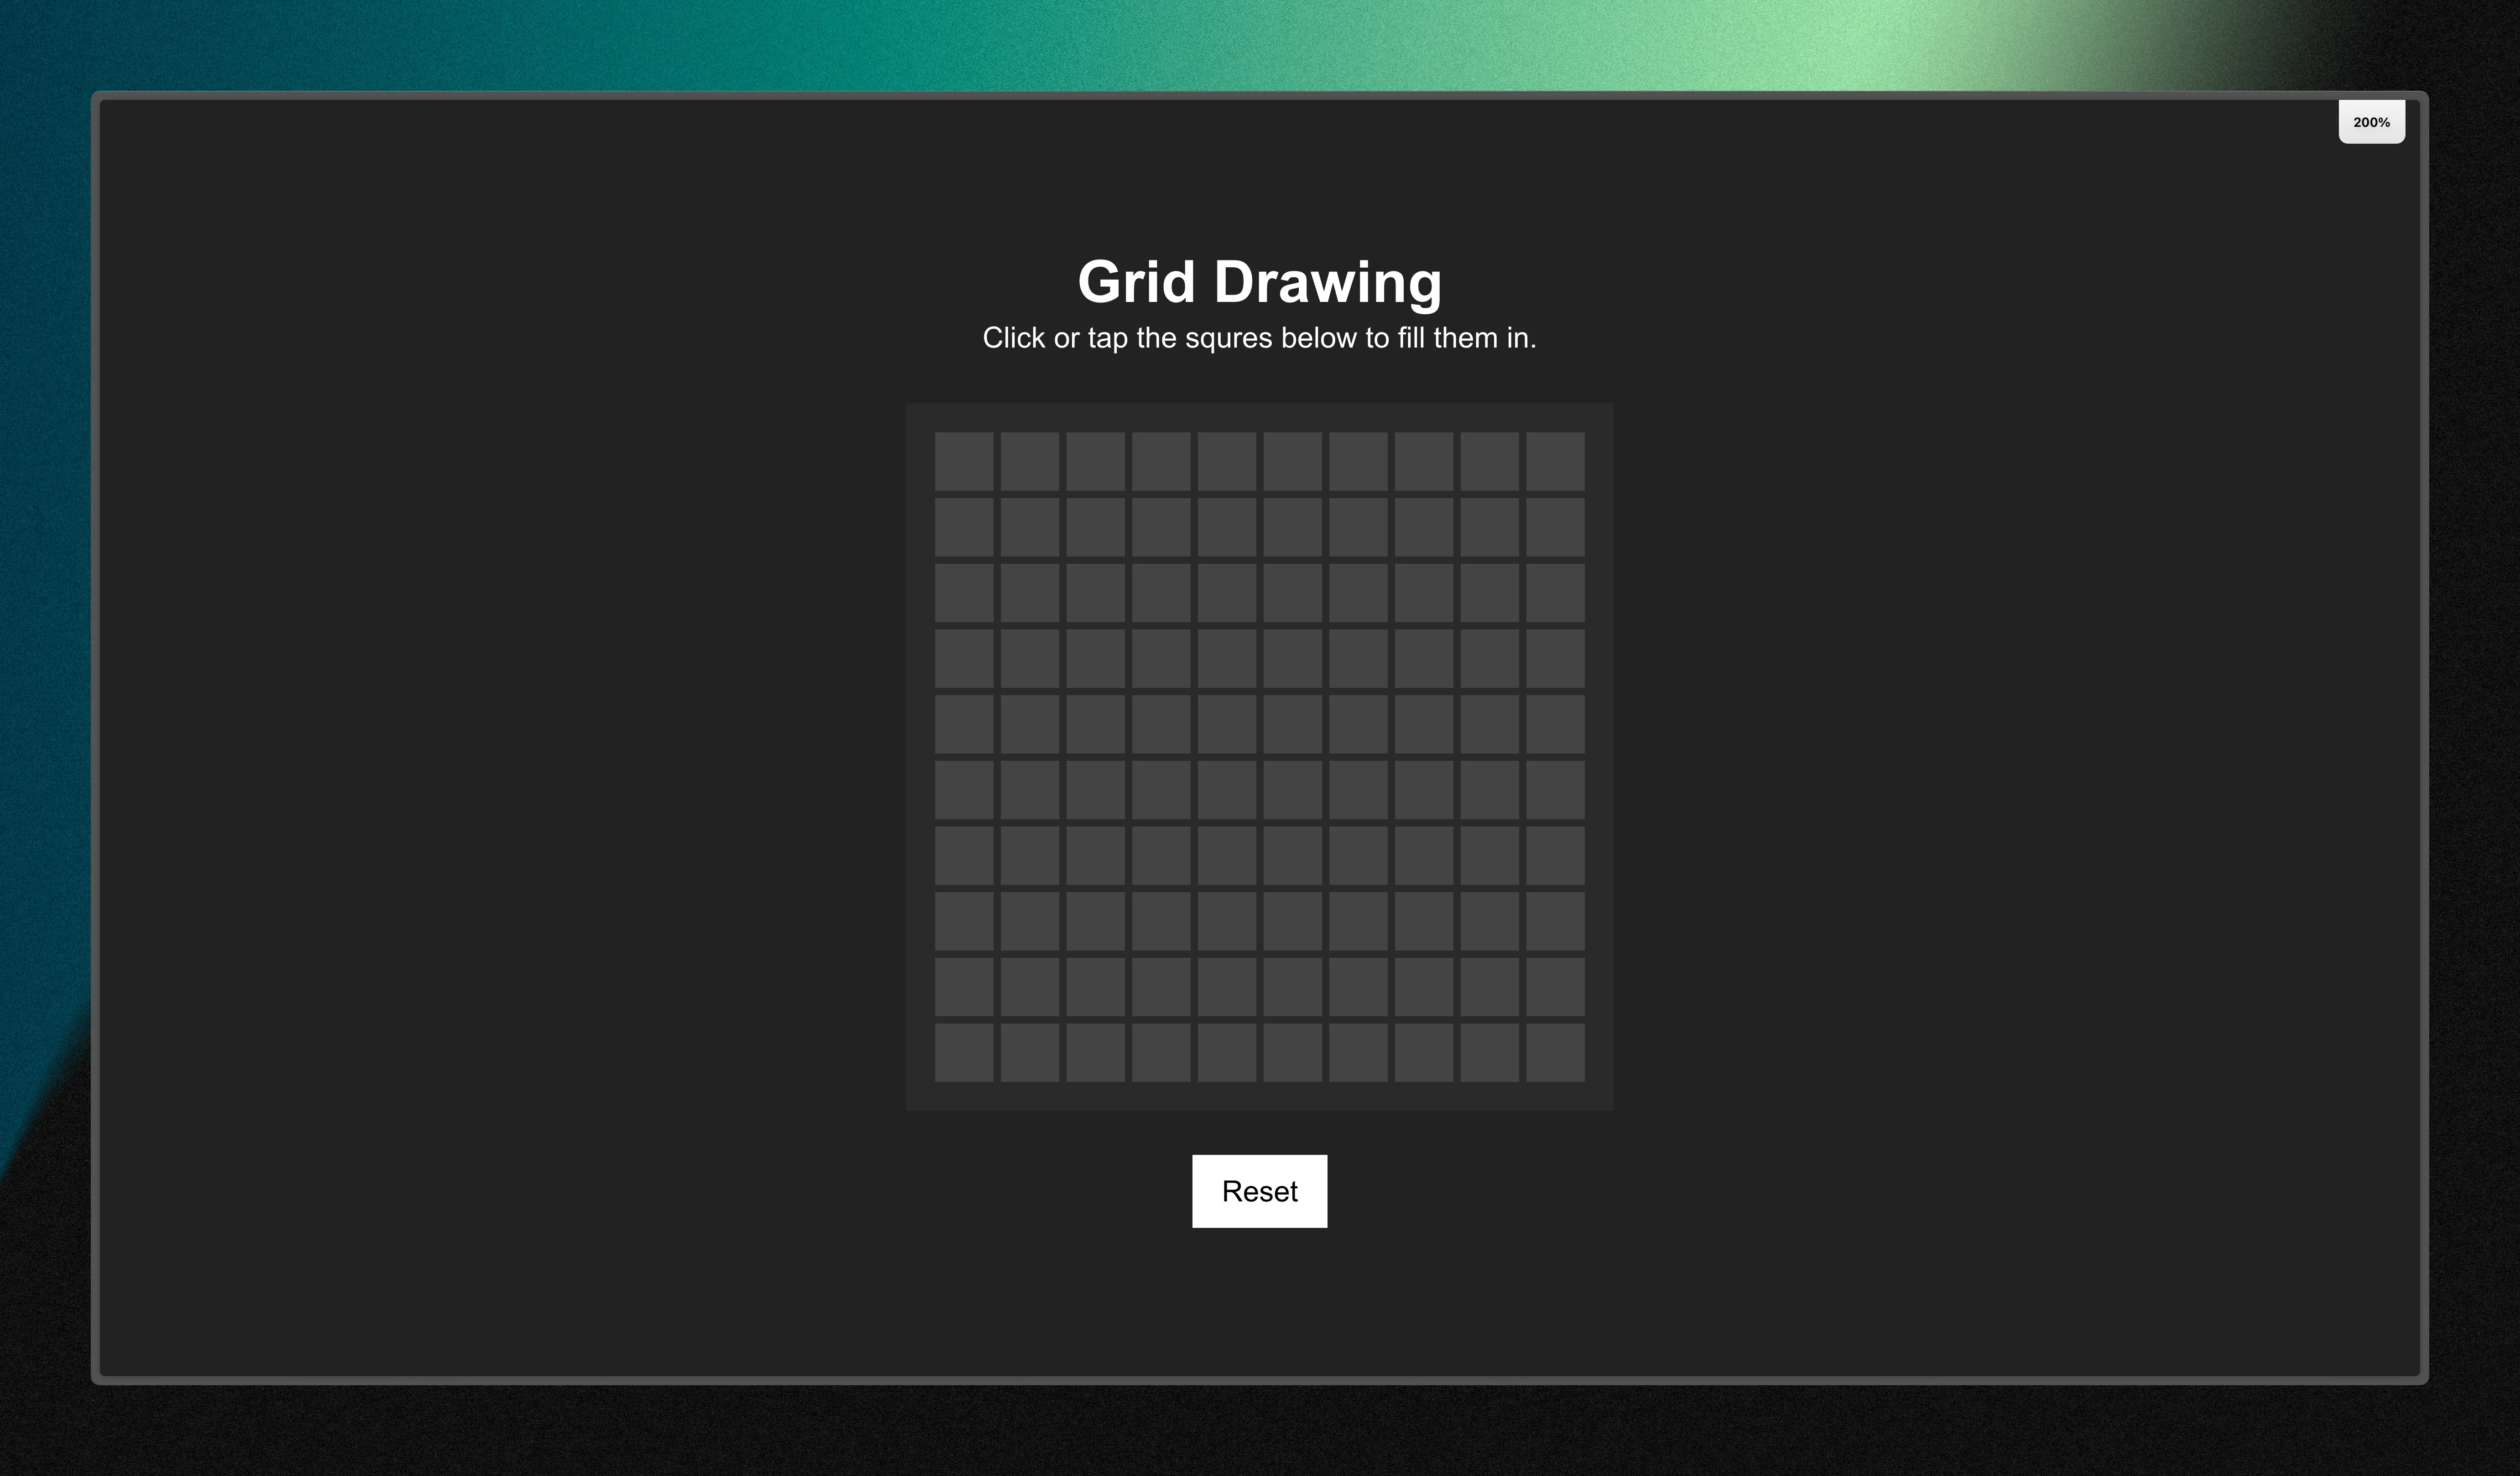 Screenshot of my Grid Drawing project